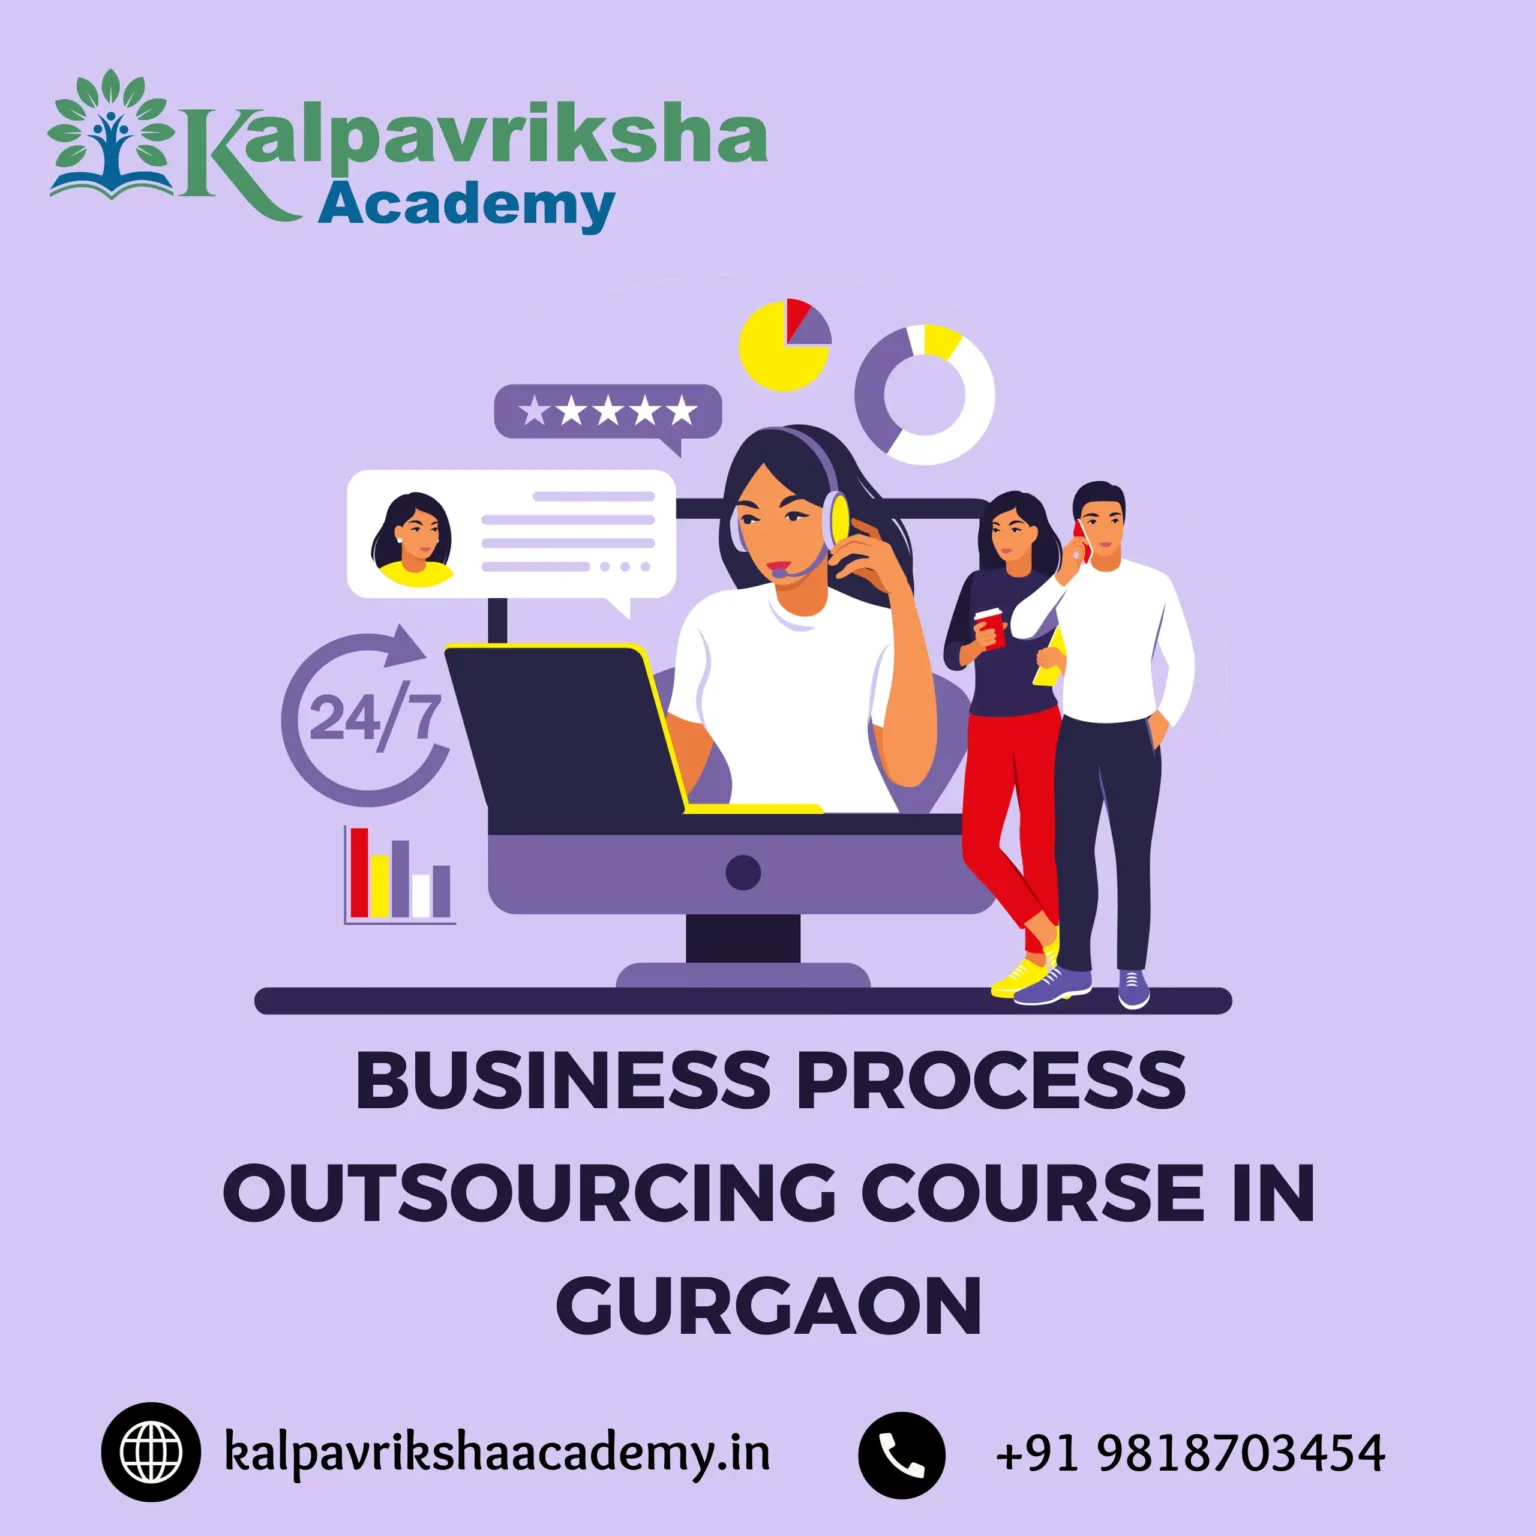 BPO Course (Business Process Outsourcing) In Gurgaon